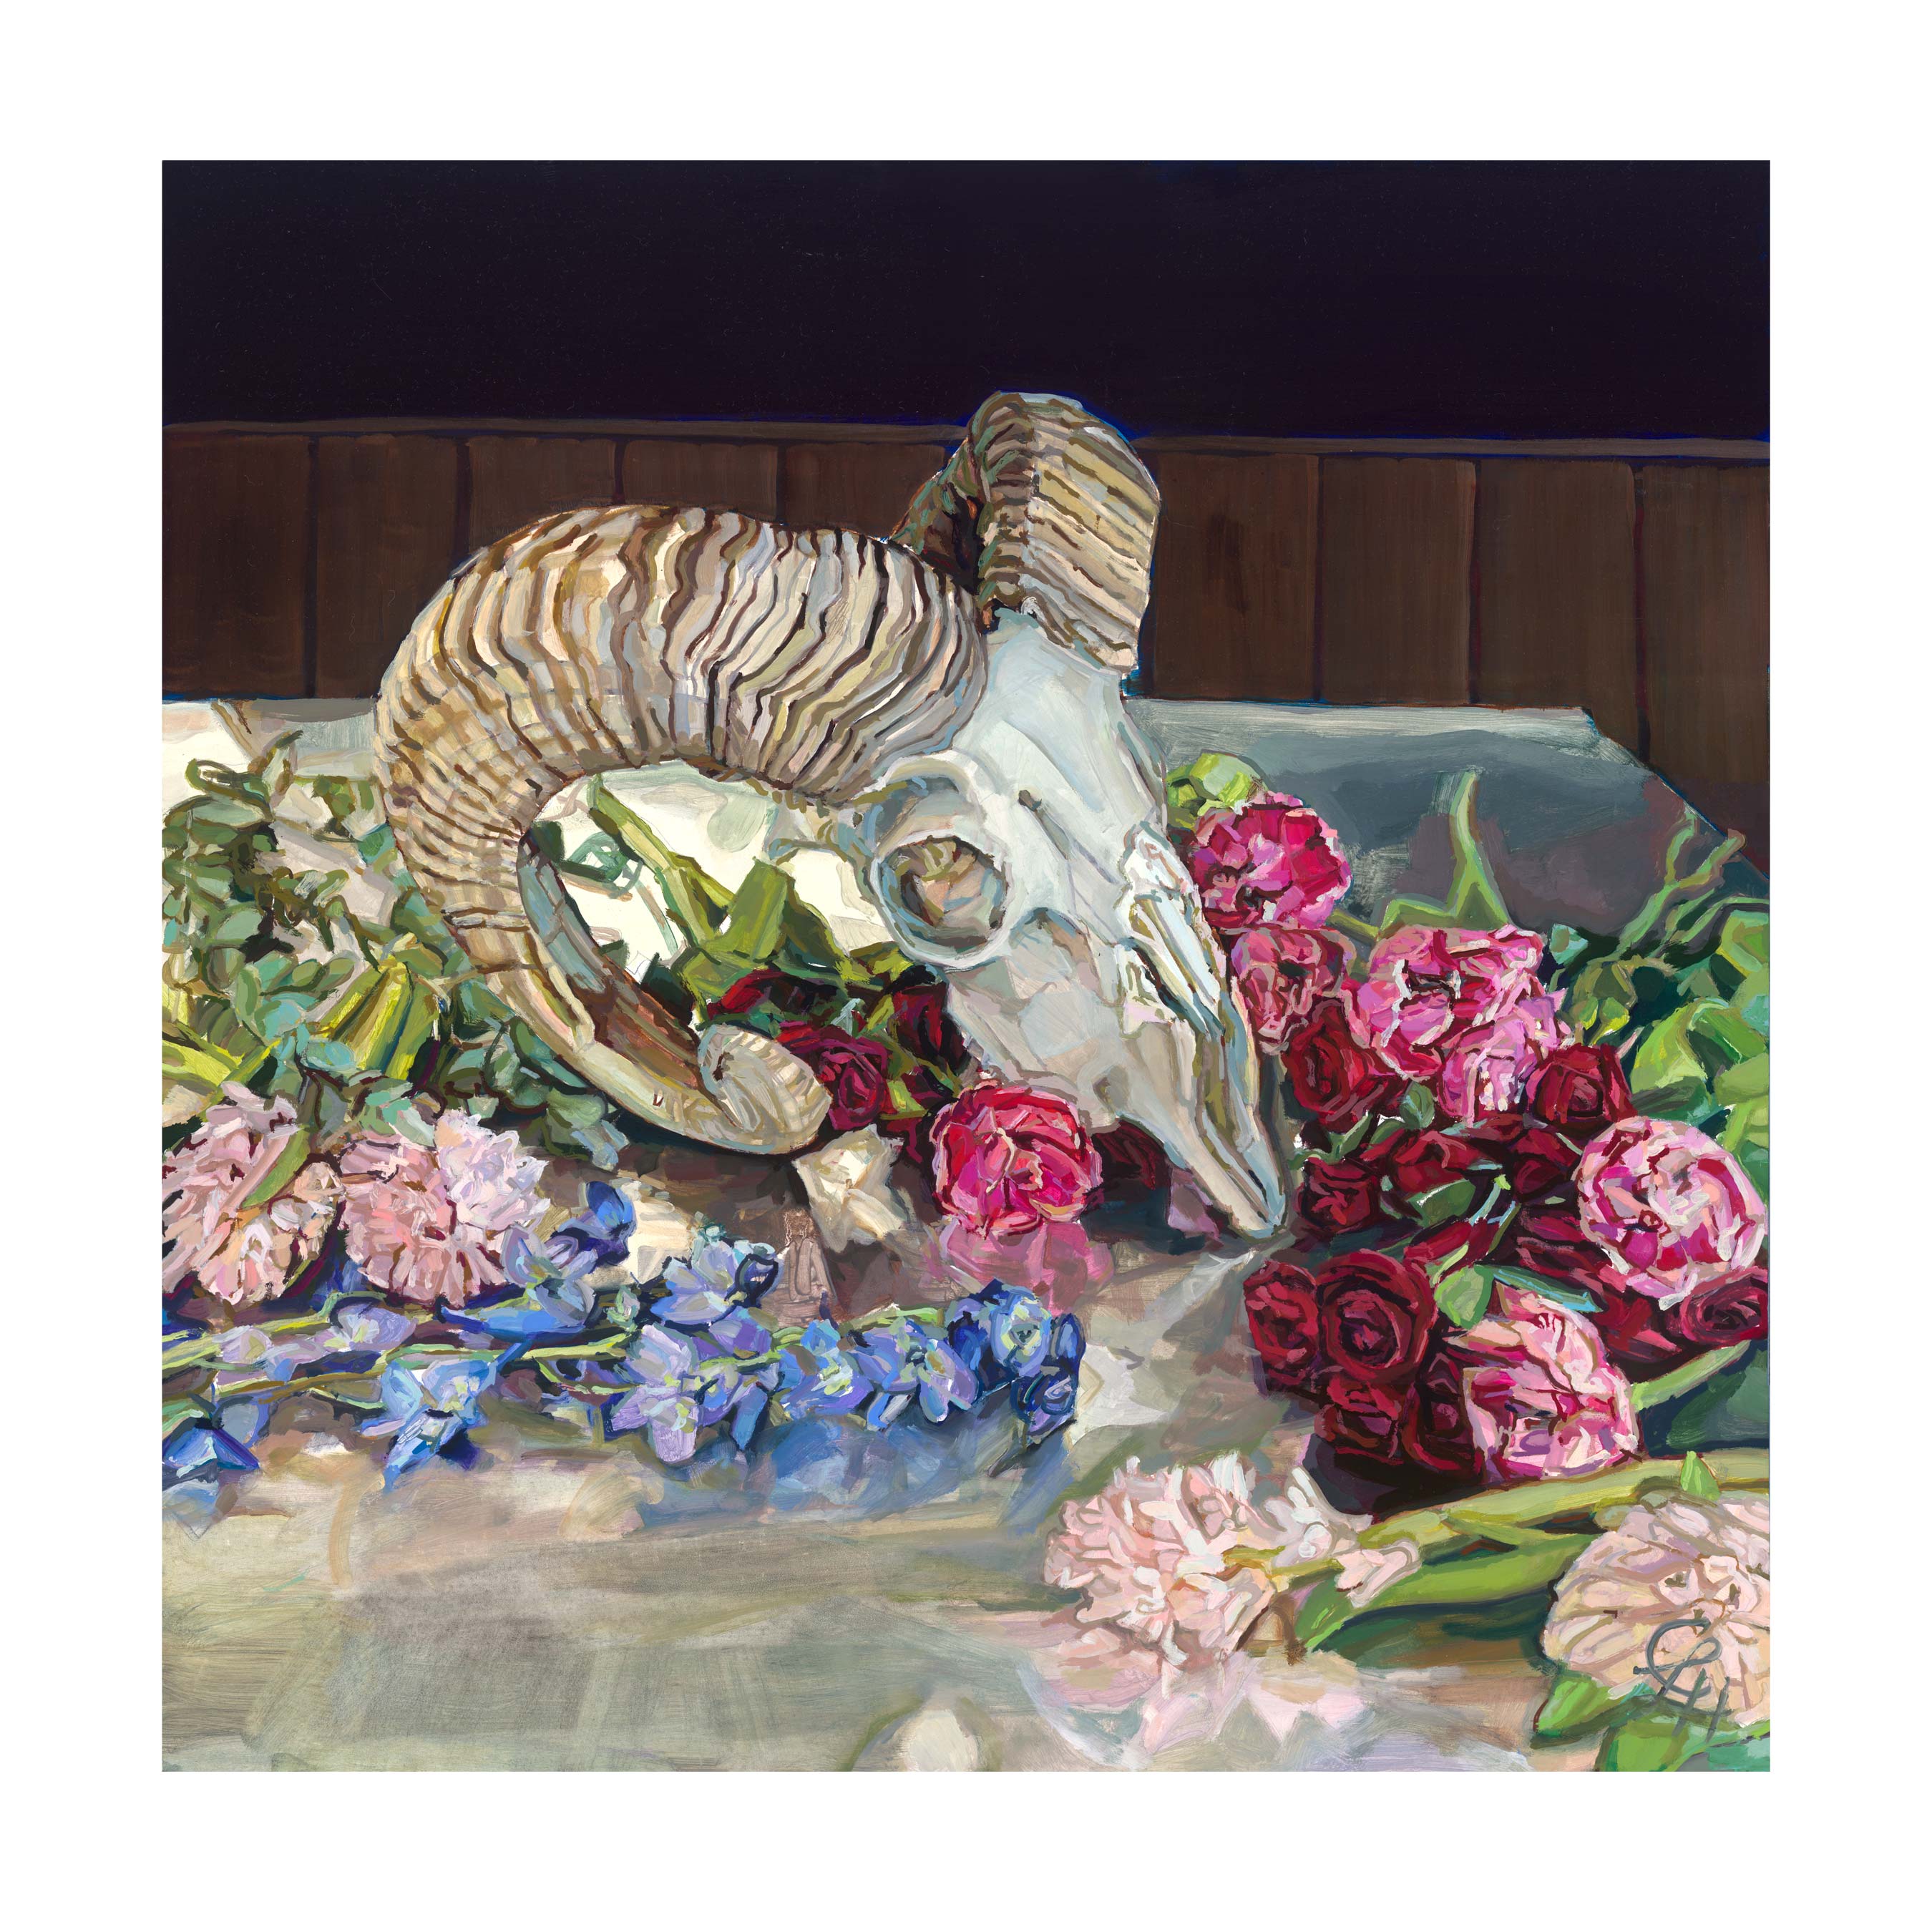 Texas ram skull and flowers still life painting with pink, red and blue flowers by Austin artist